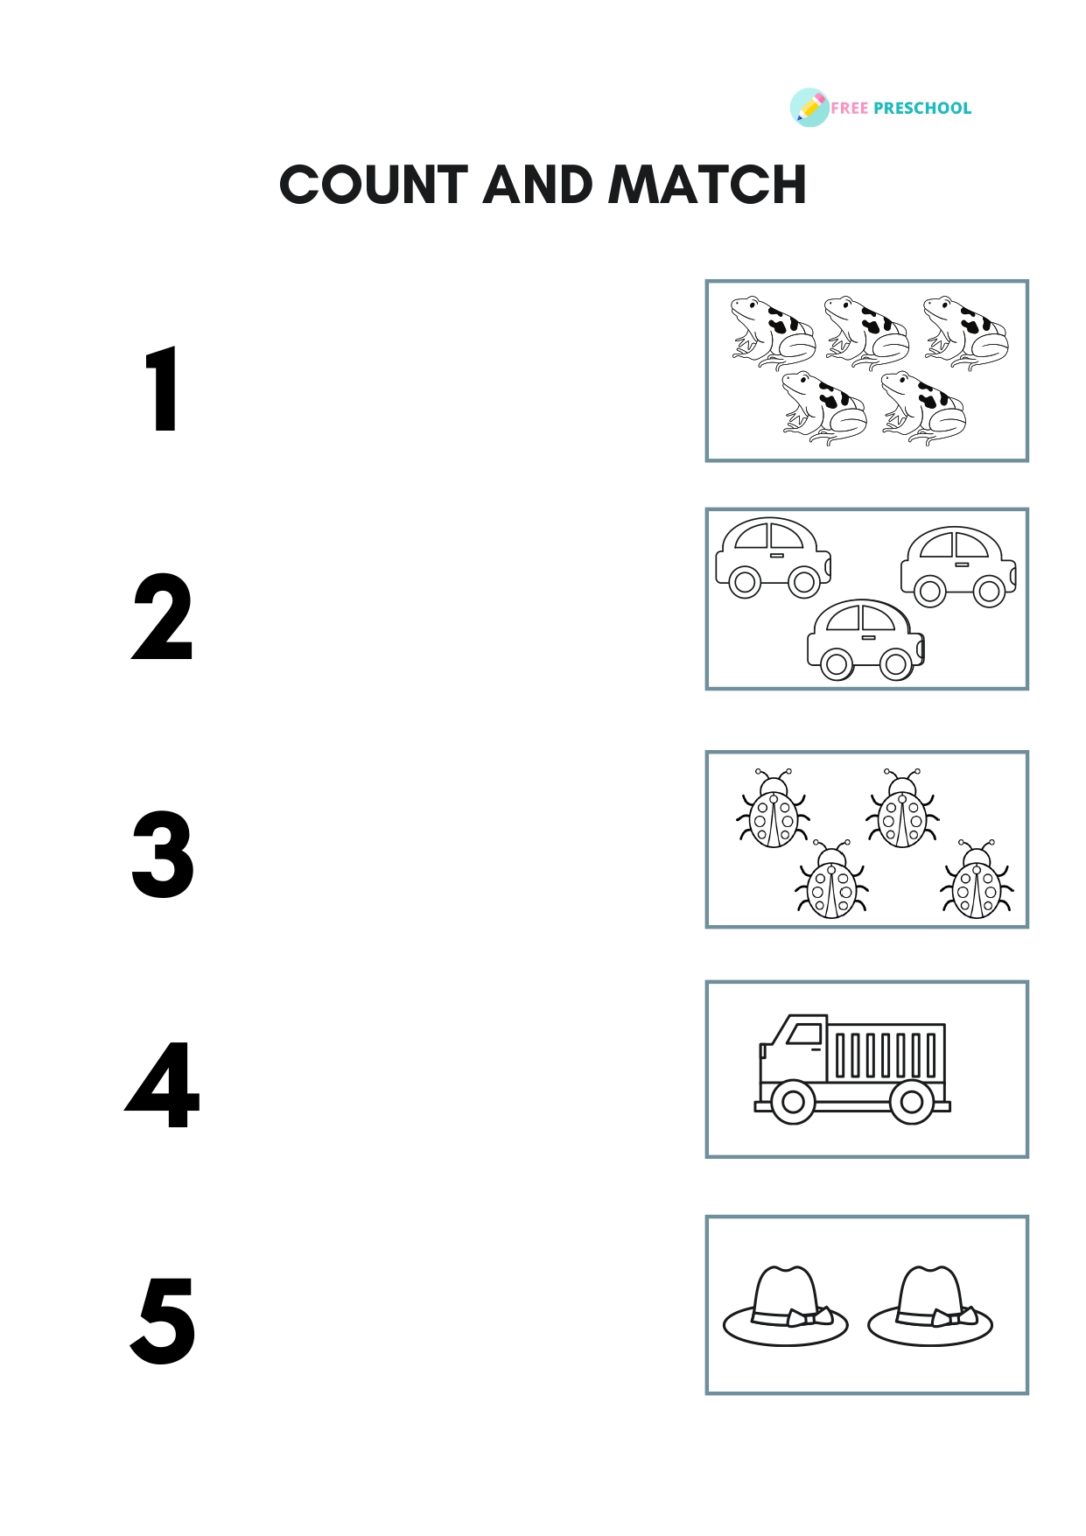 count-and-match-kids-worksheets-preschool-preschool-math-worksheets-count-and-match-worksheet